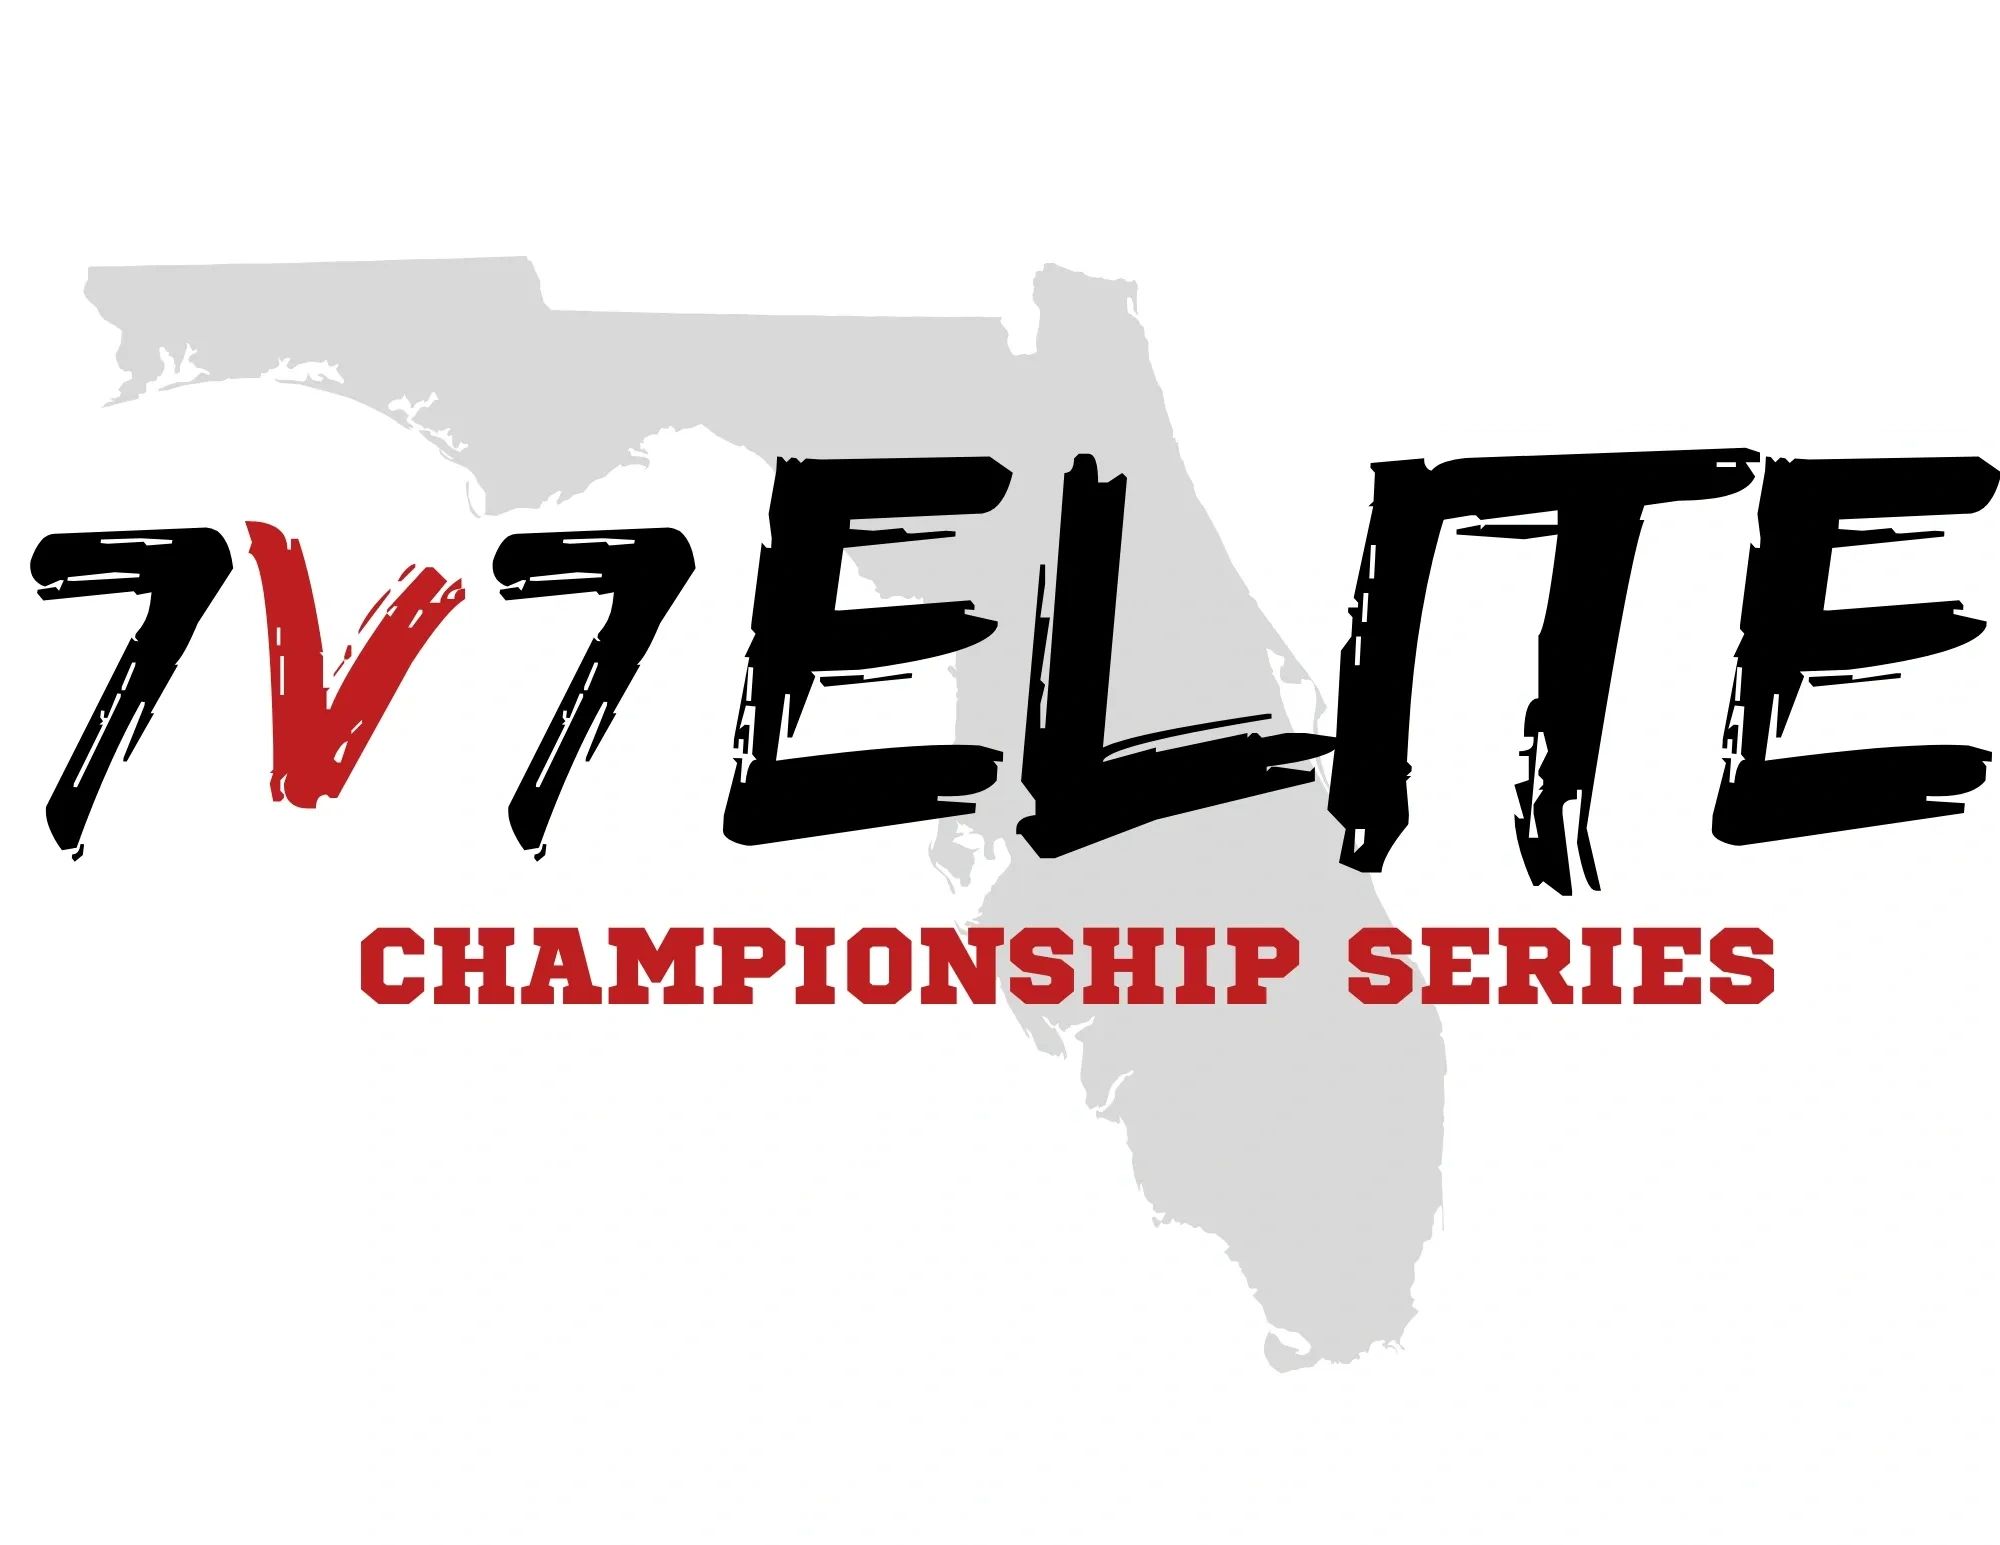 7v7 Elite Championship Series for the state of Florida. Will be hosted in Miami, Jacksonville, Tampa